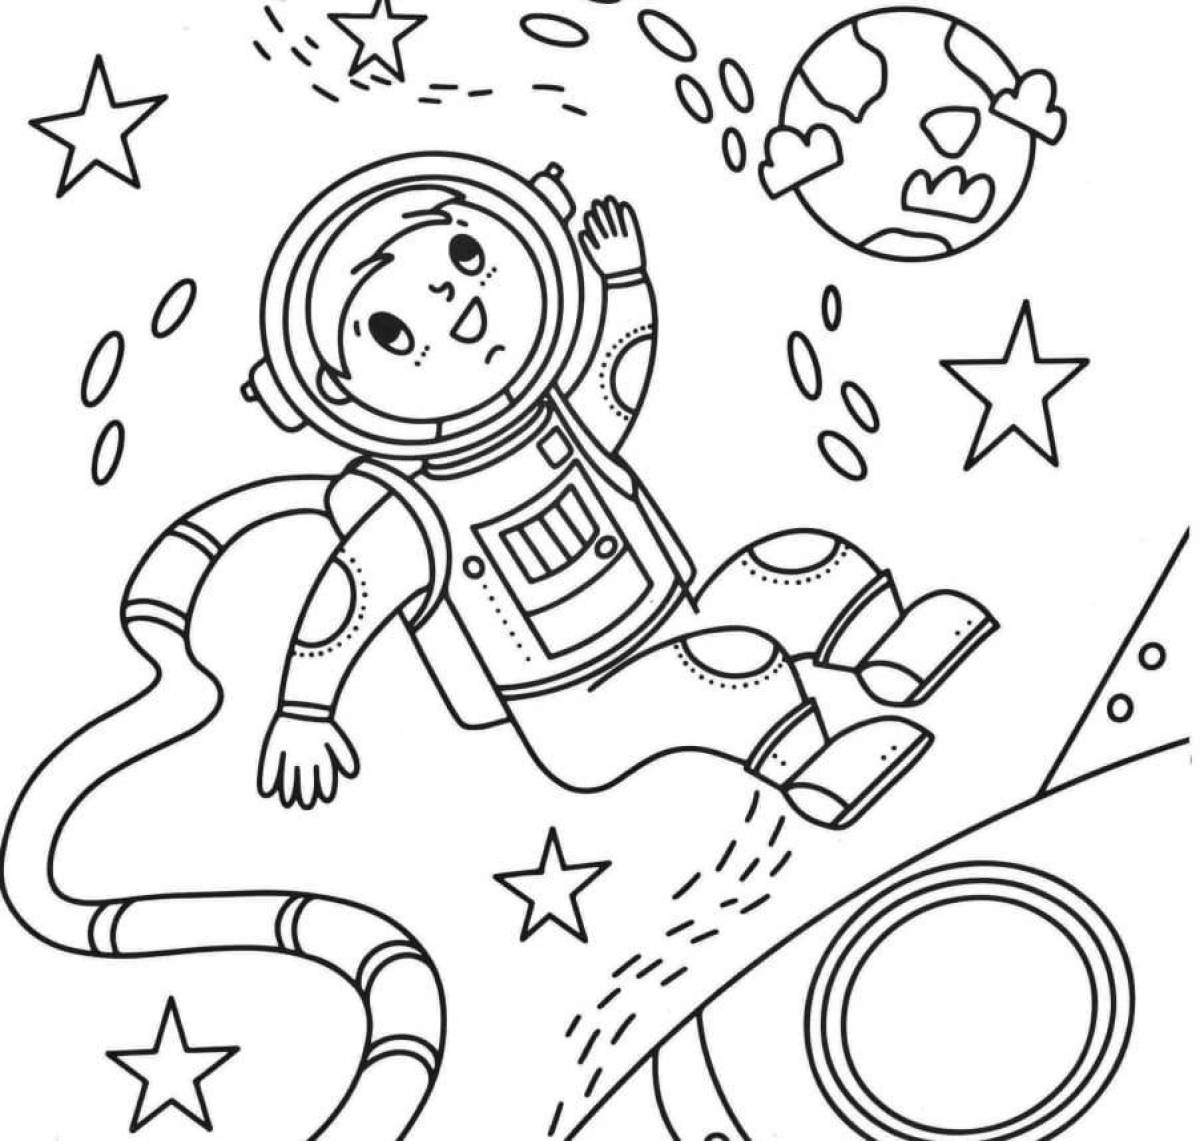 Dazzling space coloring book for kids